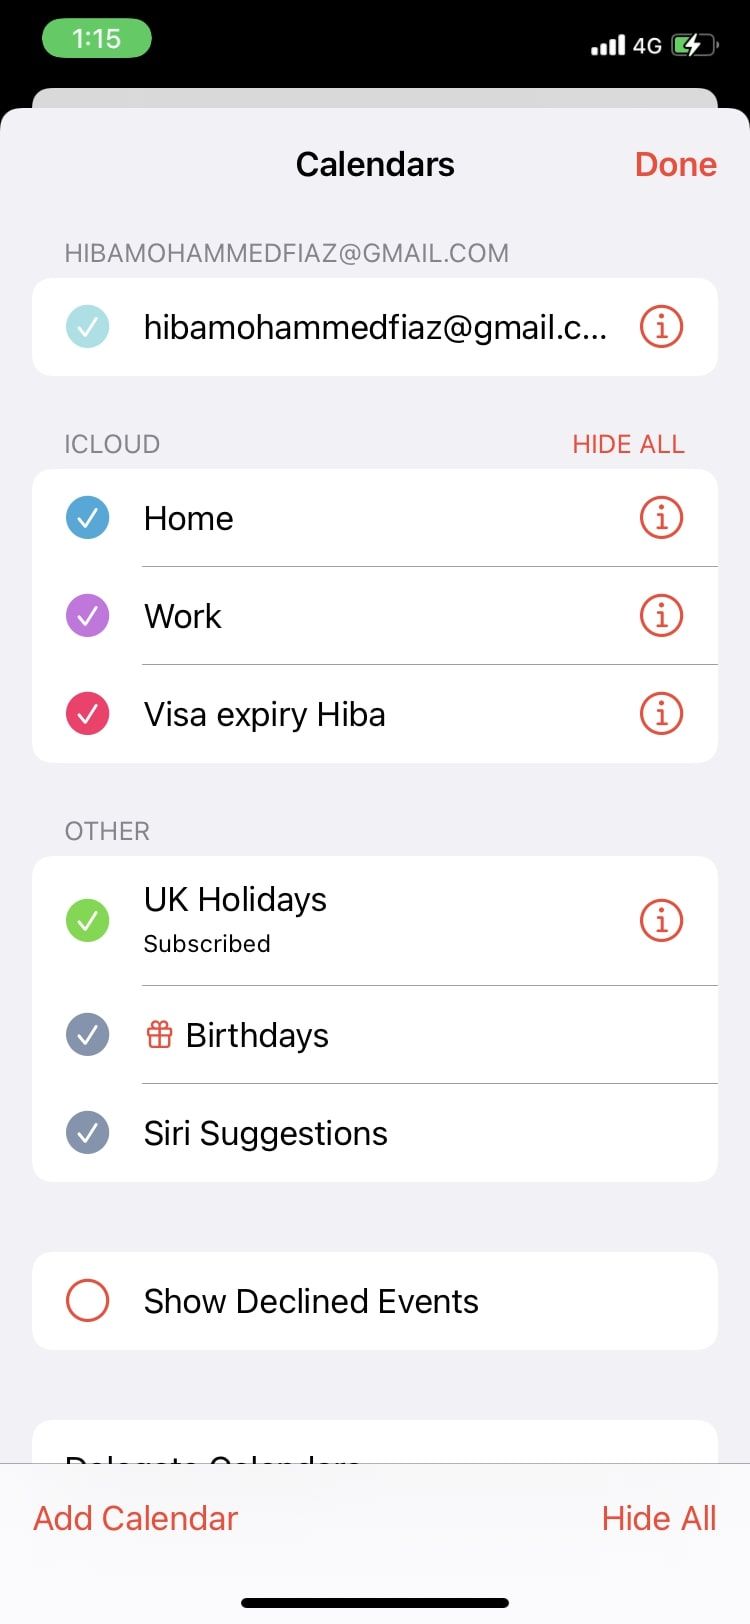 all calendars and hide all option